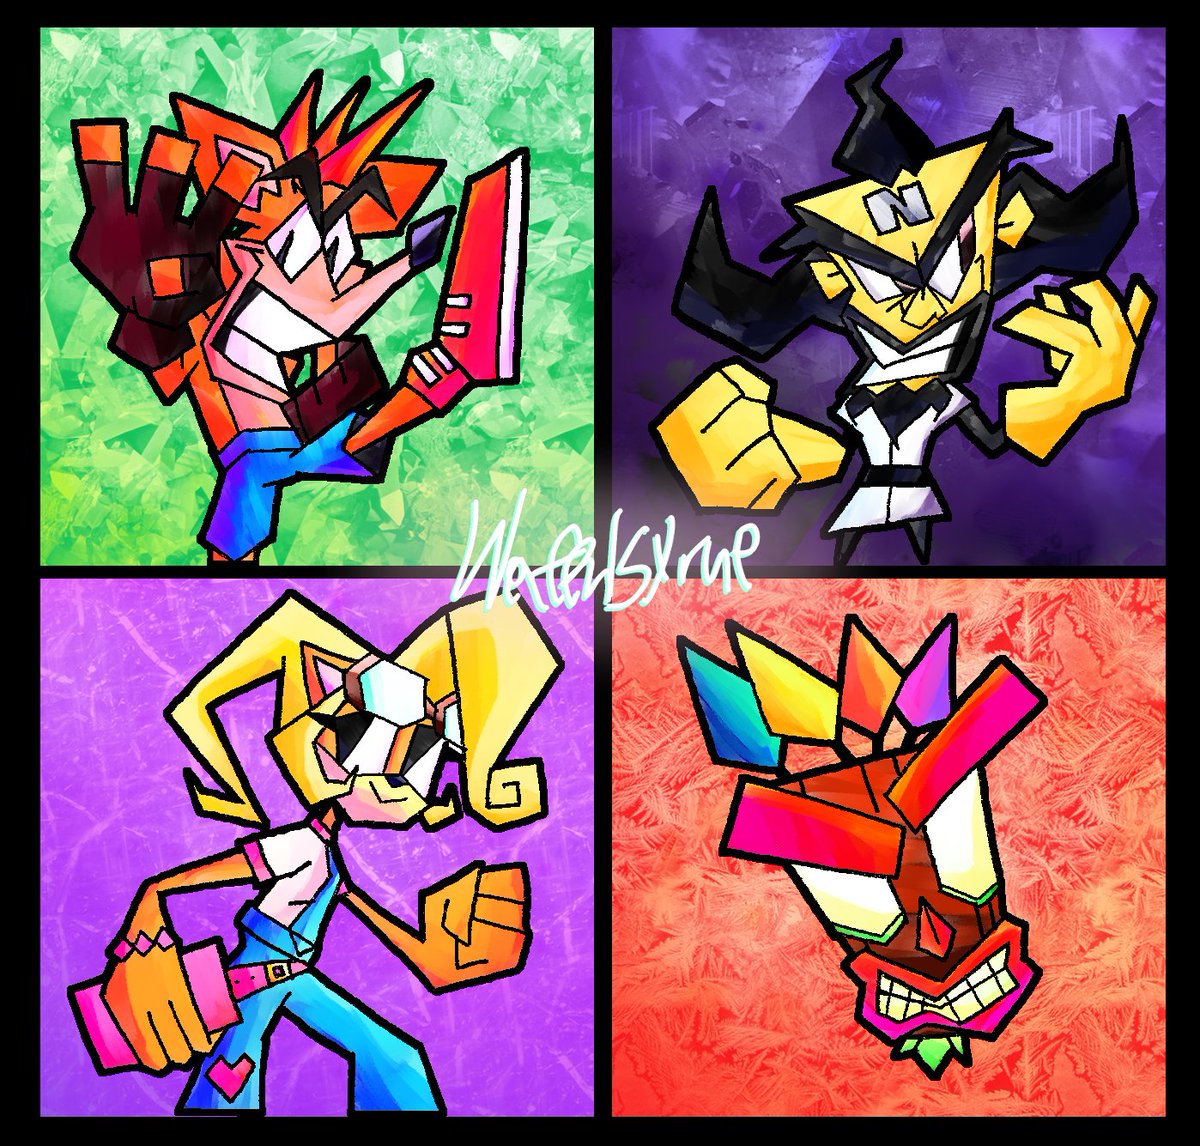 Abstractor #CrashBandicoot art I started last night.

The style captures the polygonal look while adding in some details from the current designs of the characters.

Enjoy🧡🧡🧡 